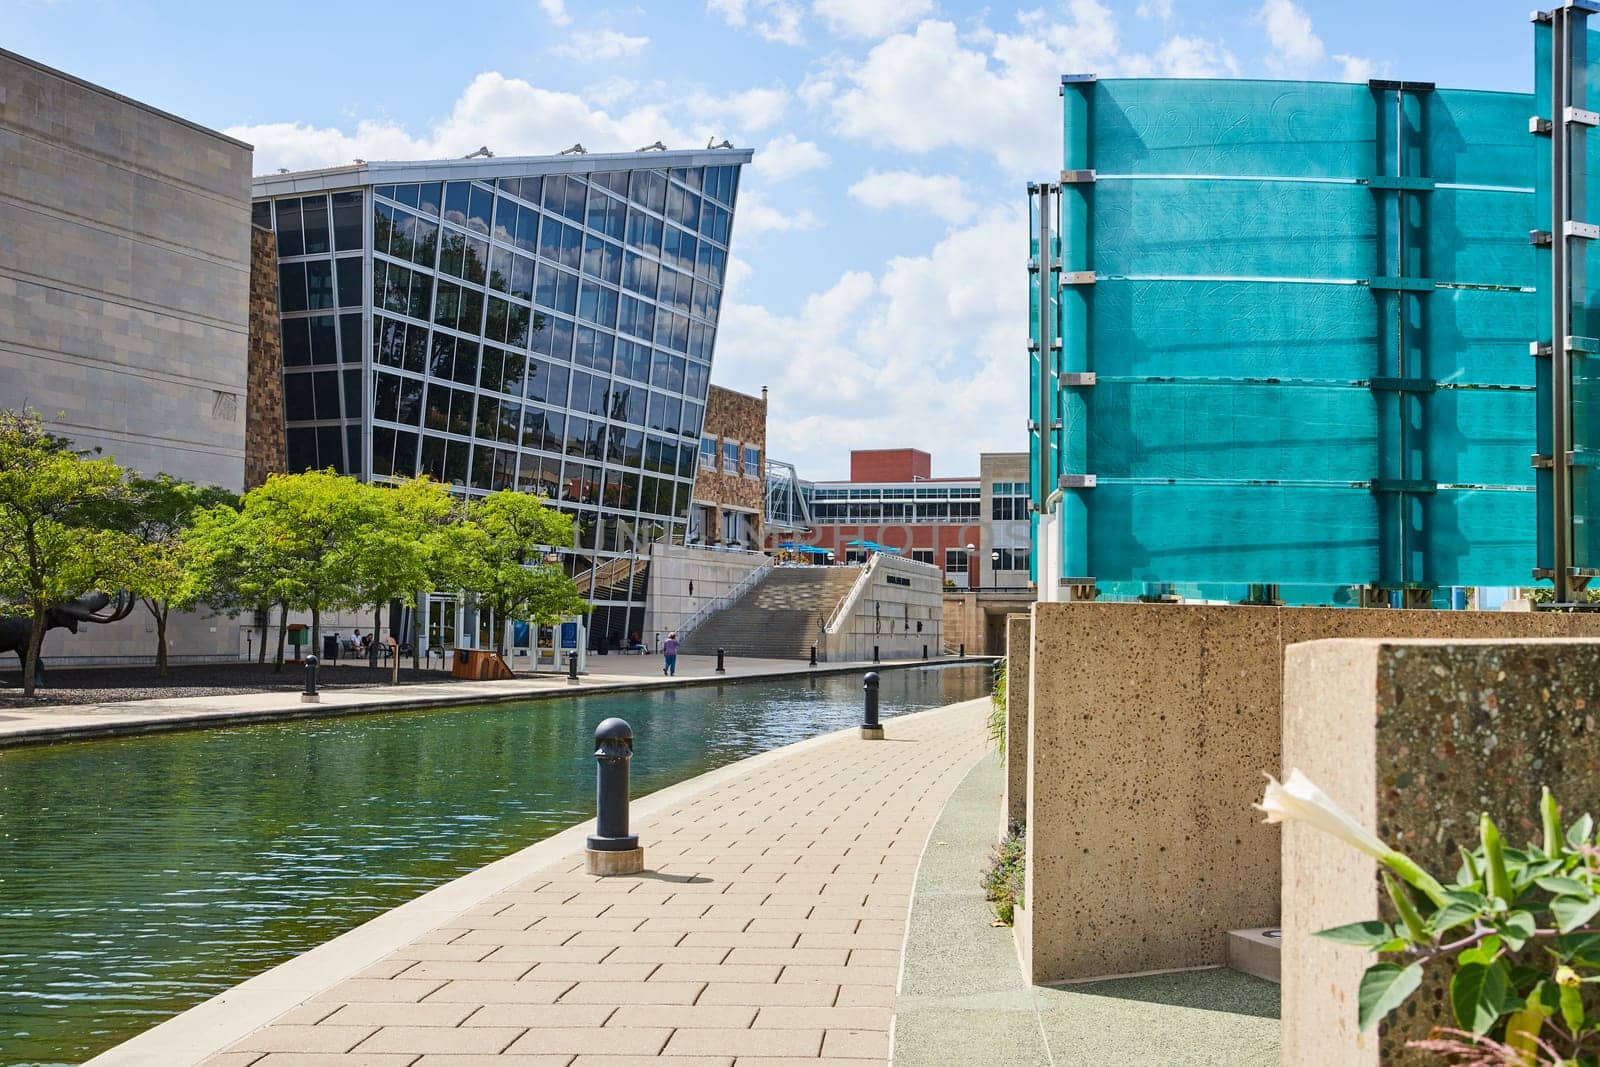 Sunny day in Indianapolis showcasing modern architecture, a serene canal and vibrant teal structure alongside a peaceful waterside walkway.